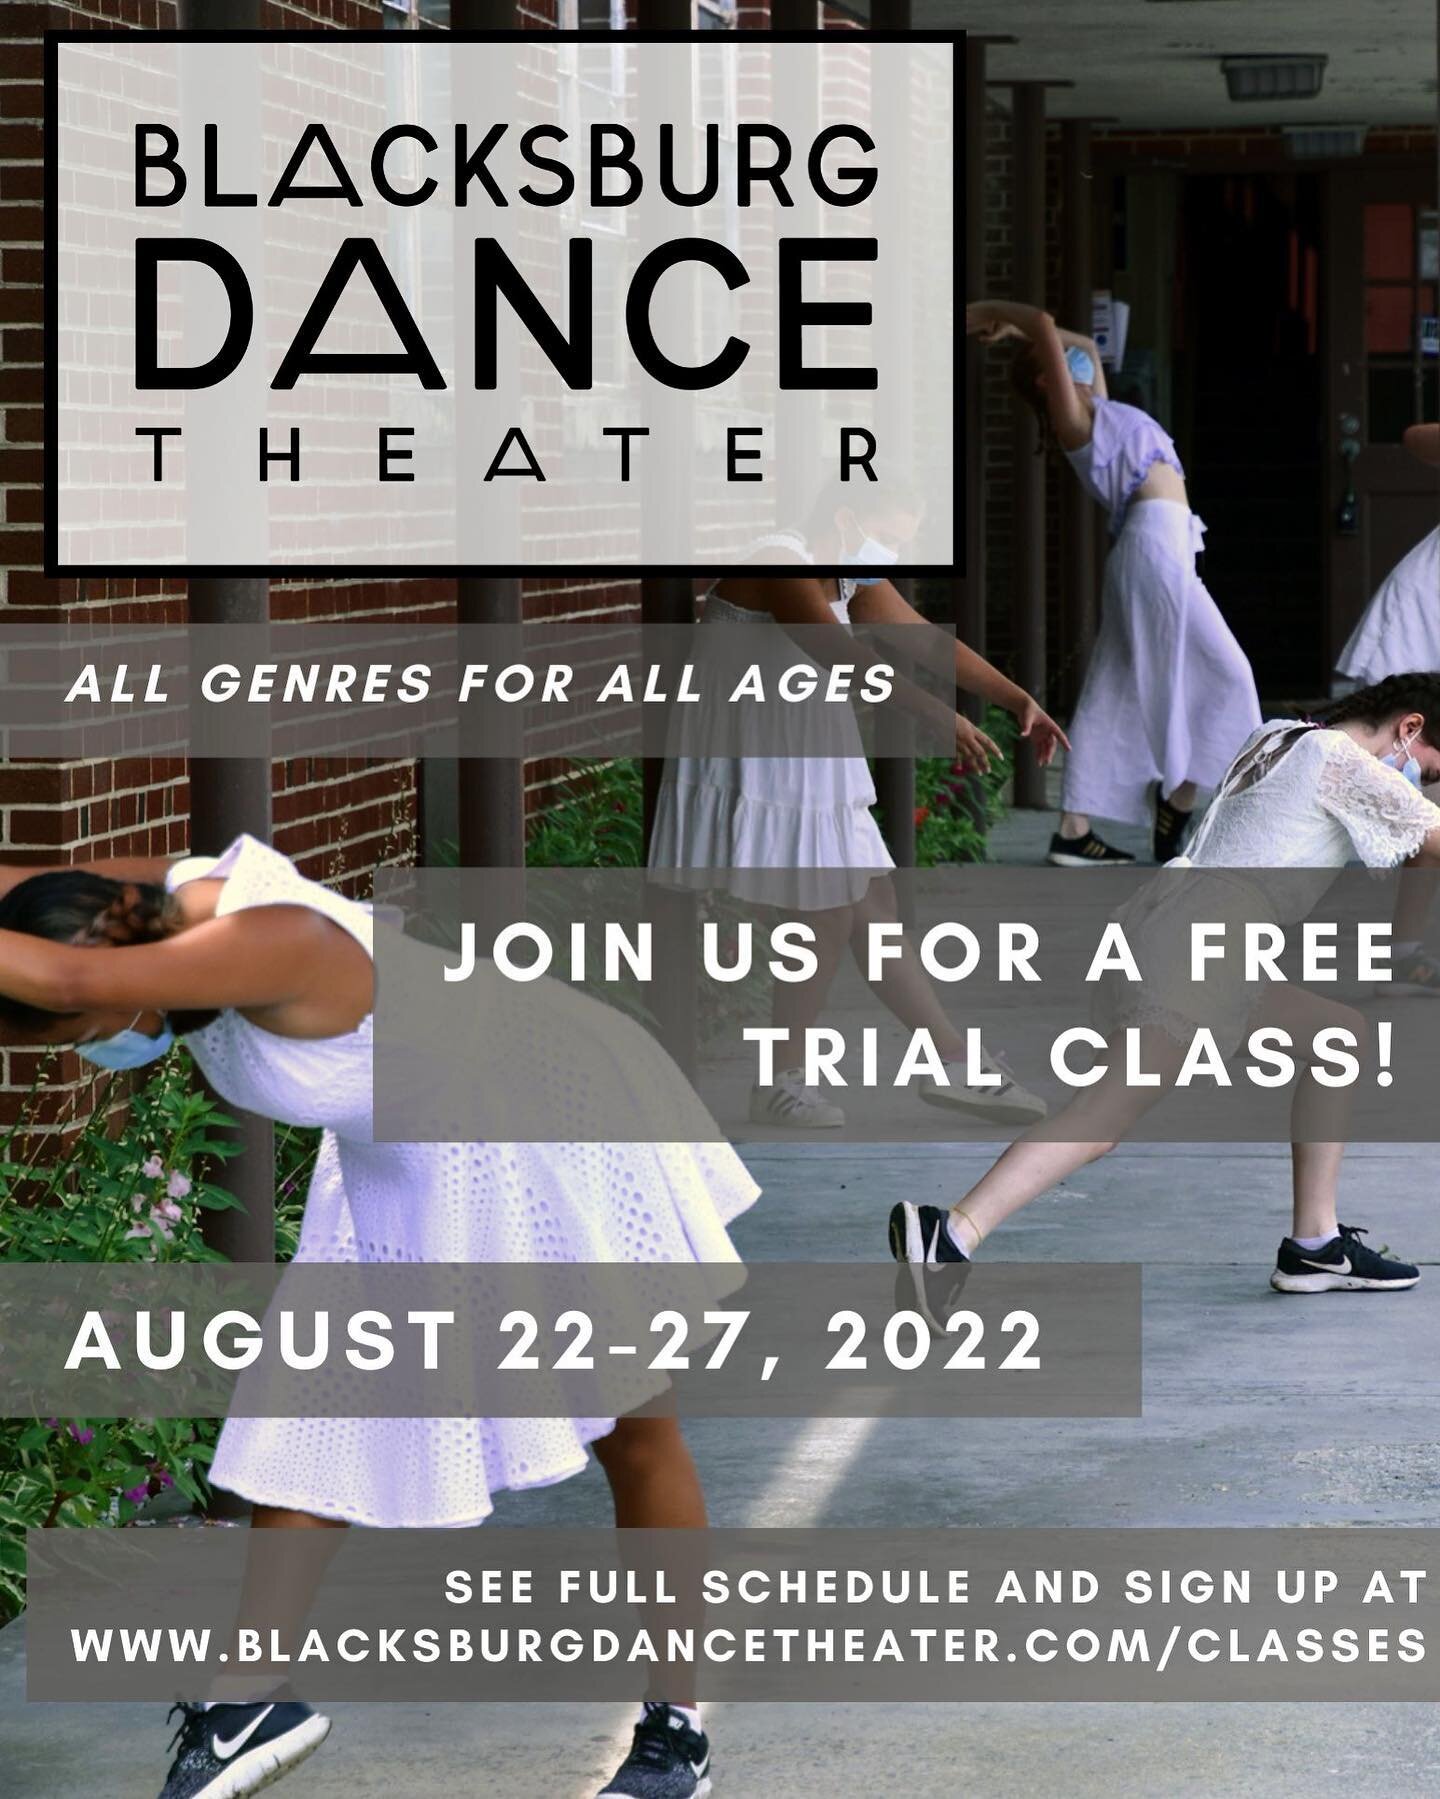 🗣 Did y&rsquo;all hear about our FREE trial classes next week?! 🗣 August 22-27, come try out any of our fall semester offerings for all ages! Tag a friend who needs more dance in their life, and sign up at the link in bio. #creativedanceforallages 